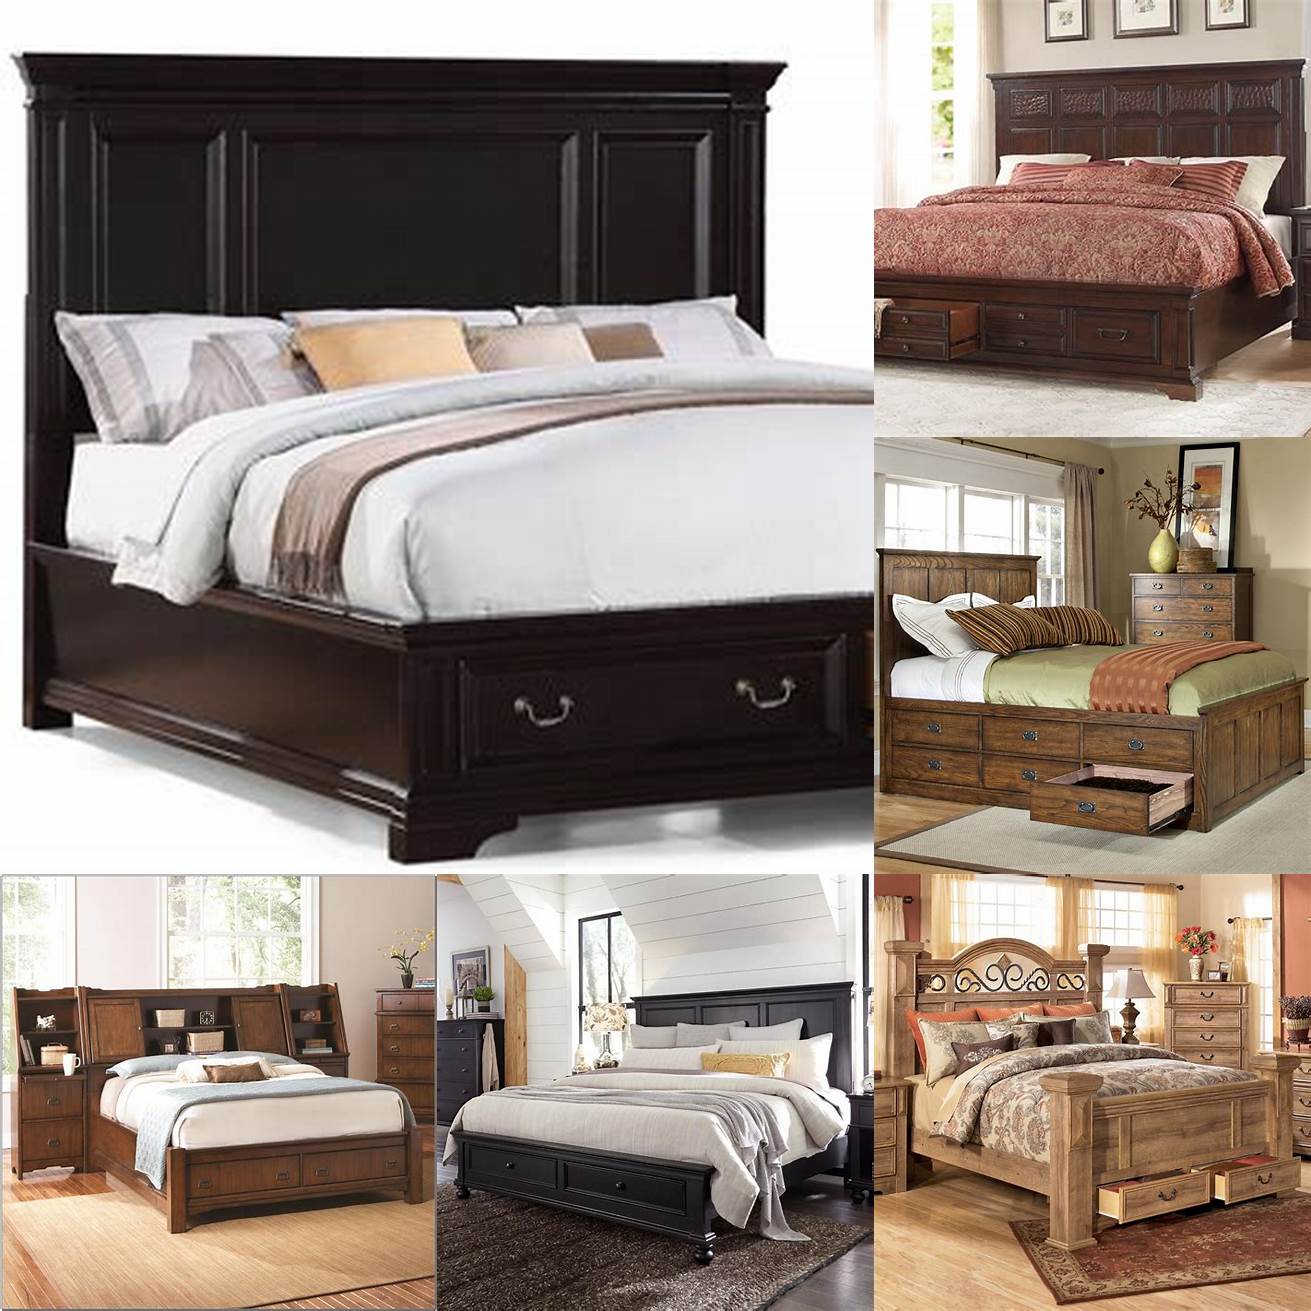 Image of a Texas King Bed with storage